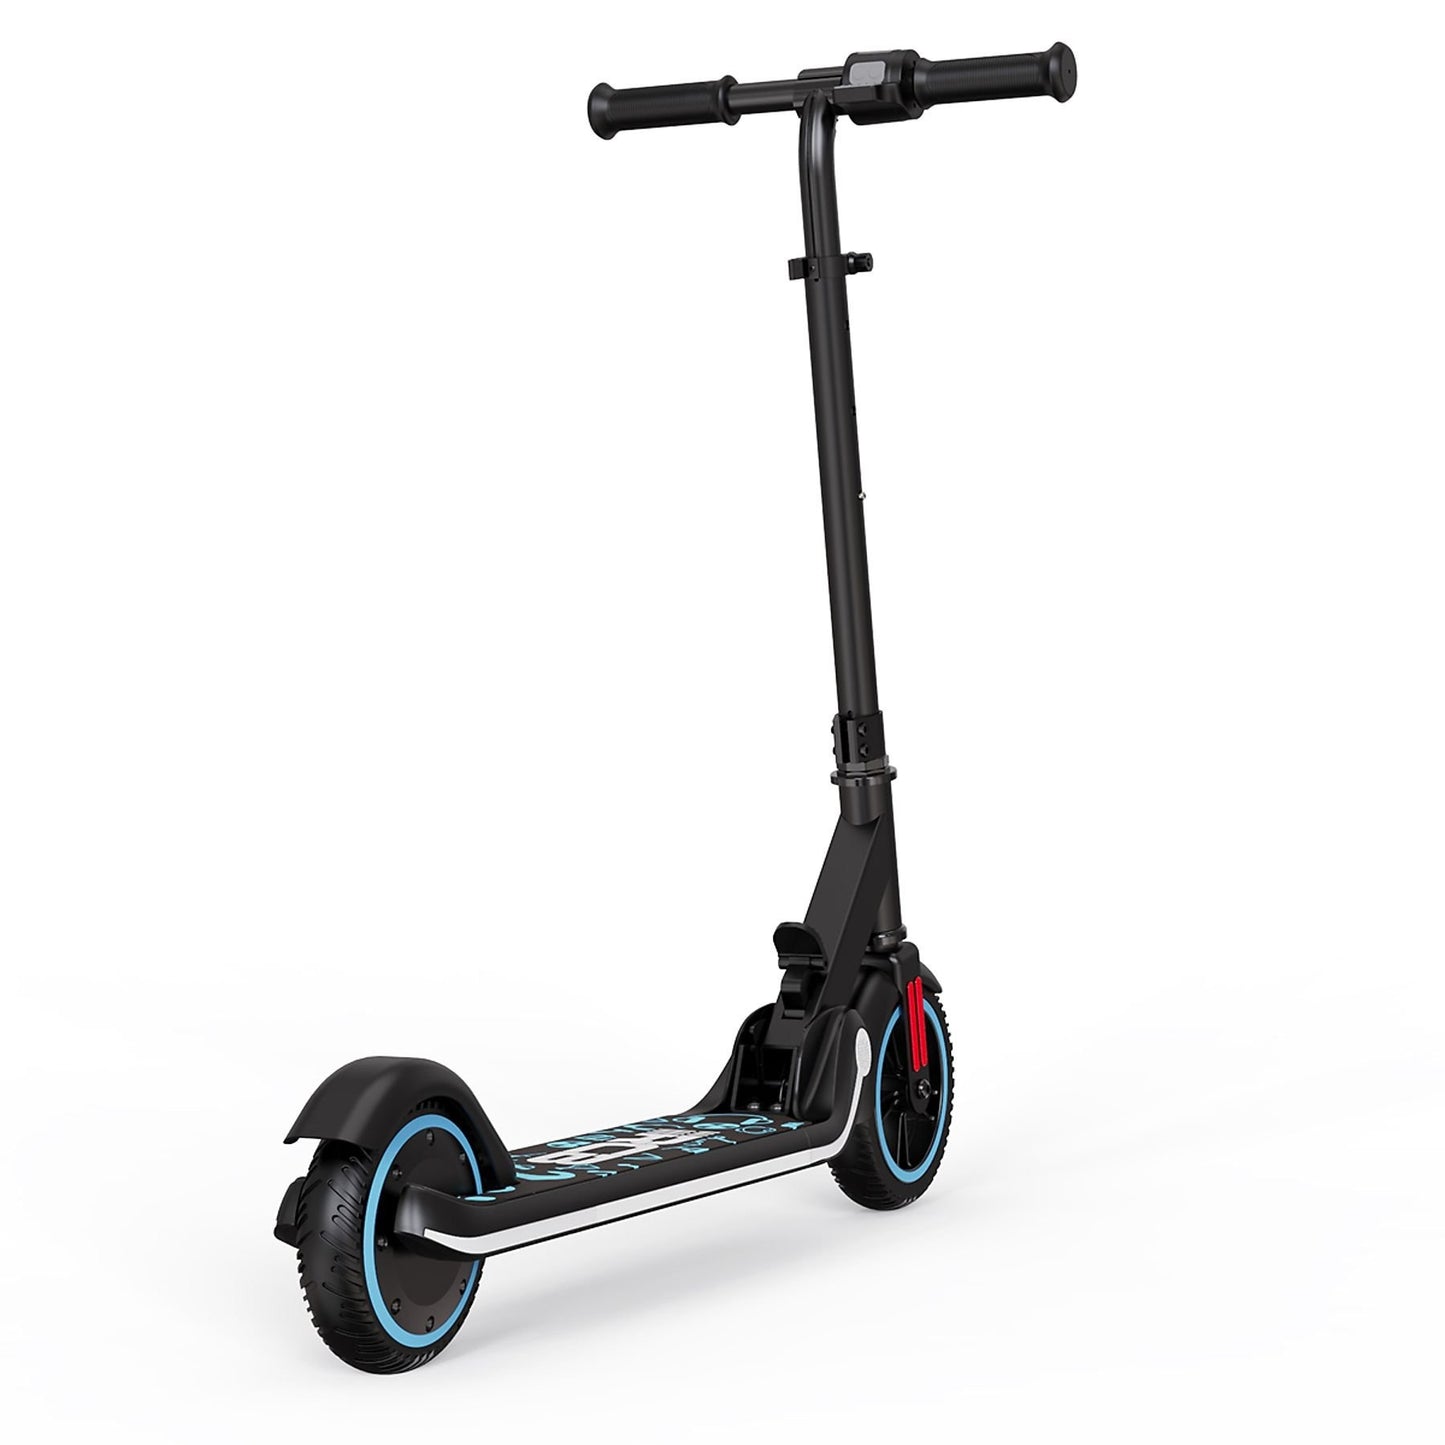 RCB R11 Electric Scooter for Kids 6-15 Ultra-long colorful neon